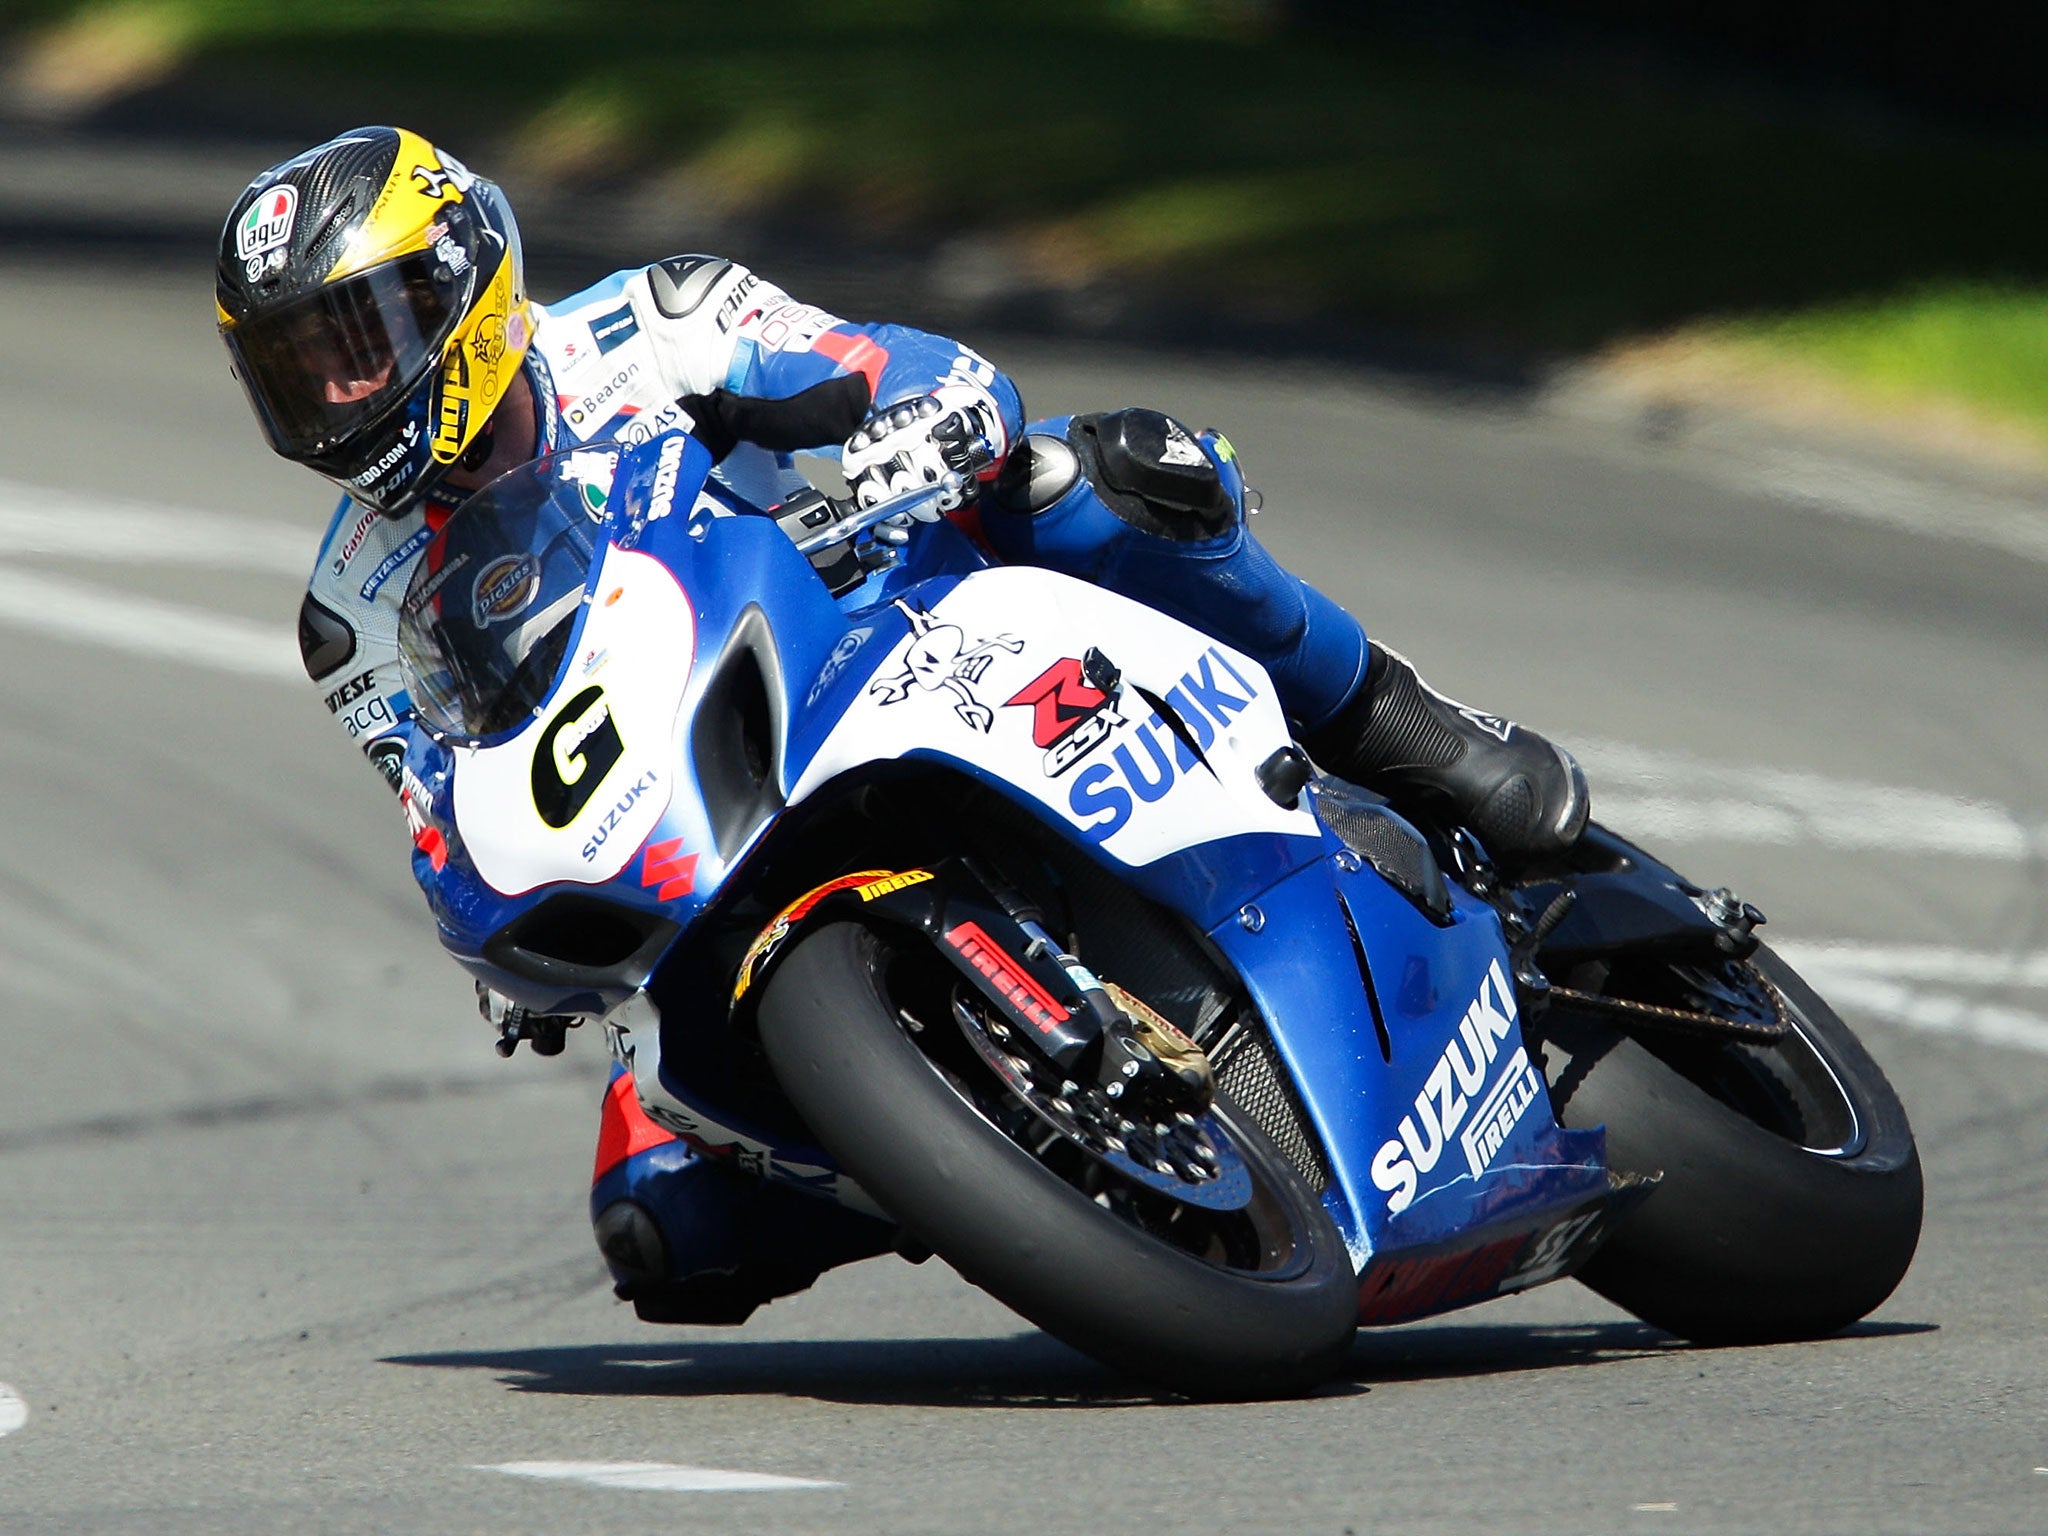 Guy Martin is yet to win at the Isle of Man TT, having finished on the podium 15 times